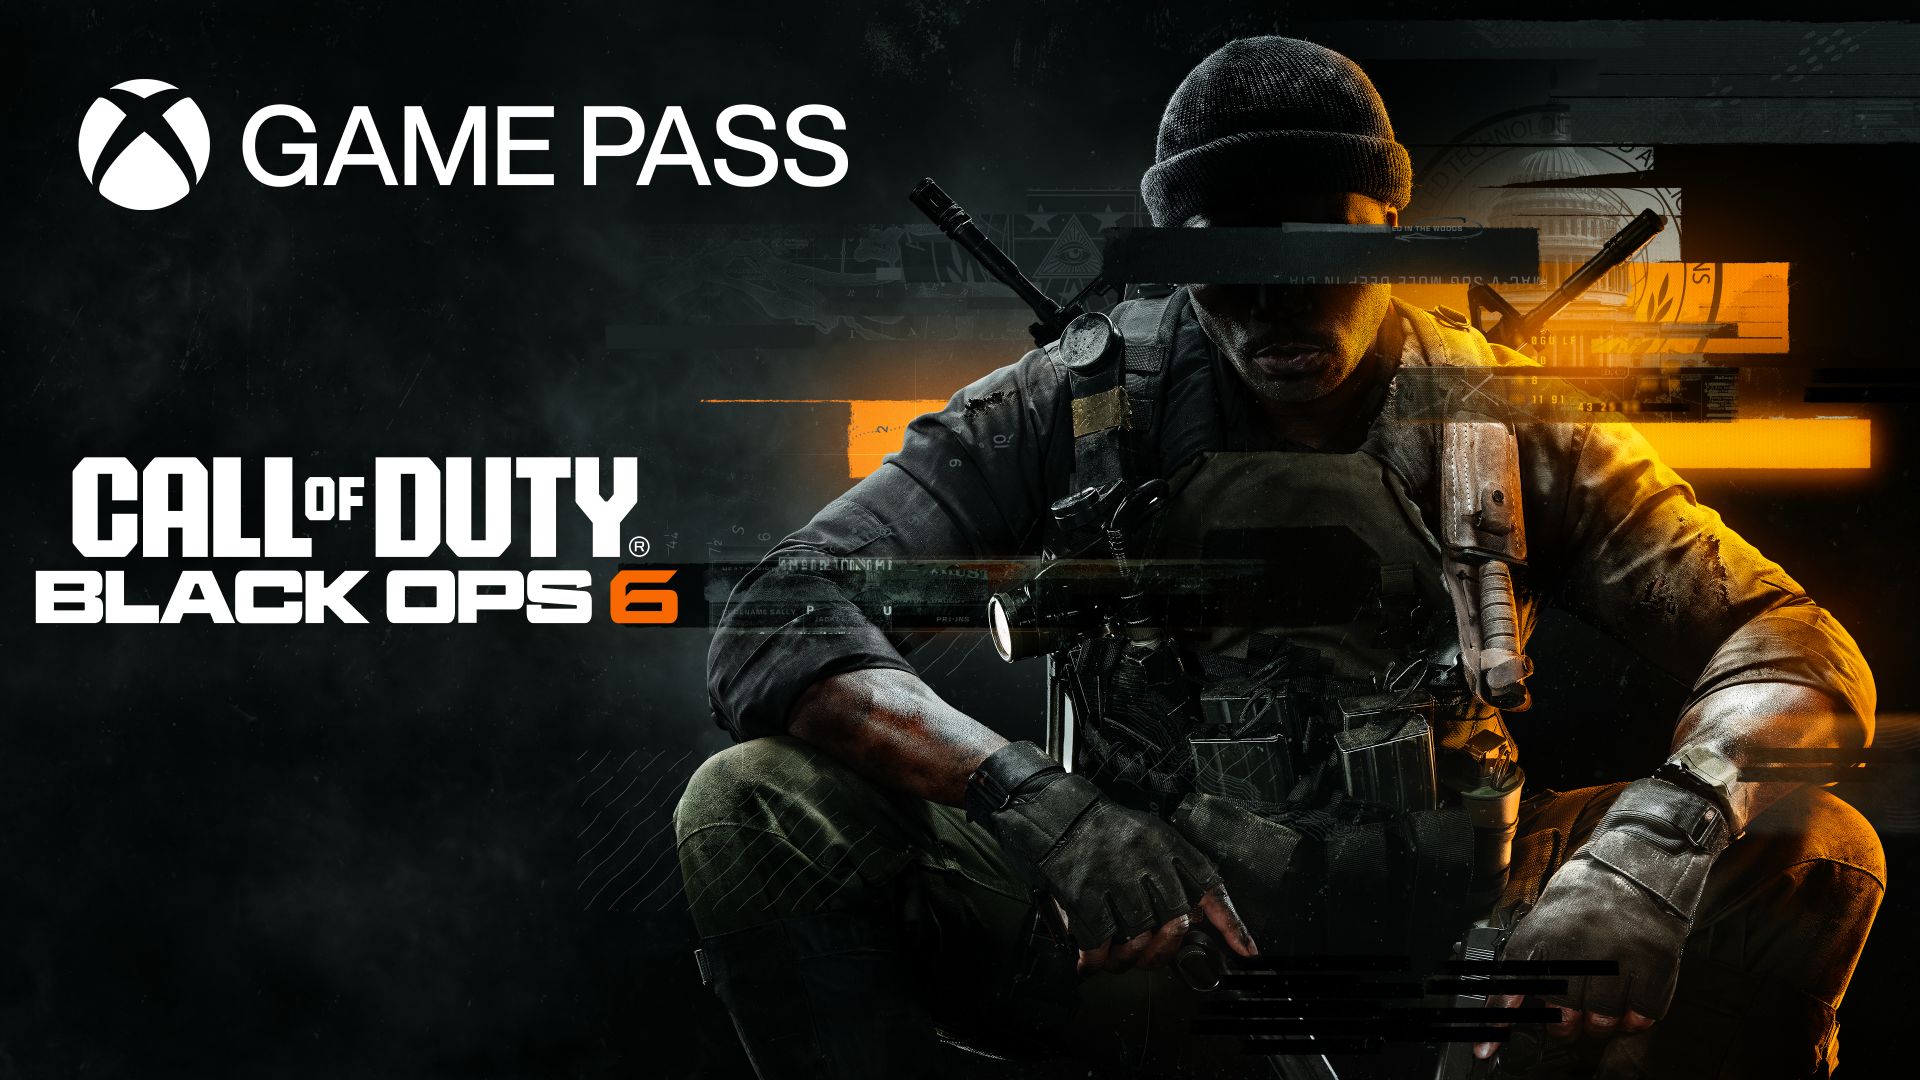 Play Call of Duty Black Ops 6 on Day One with Xbox Game Pass